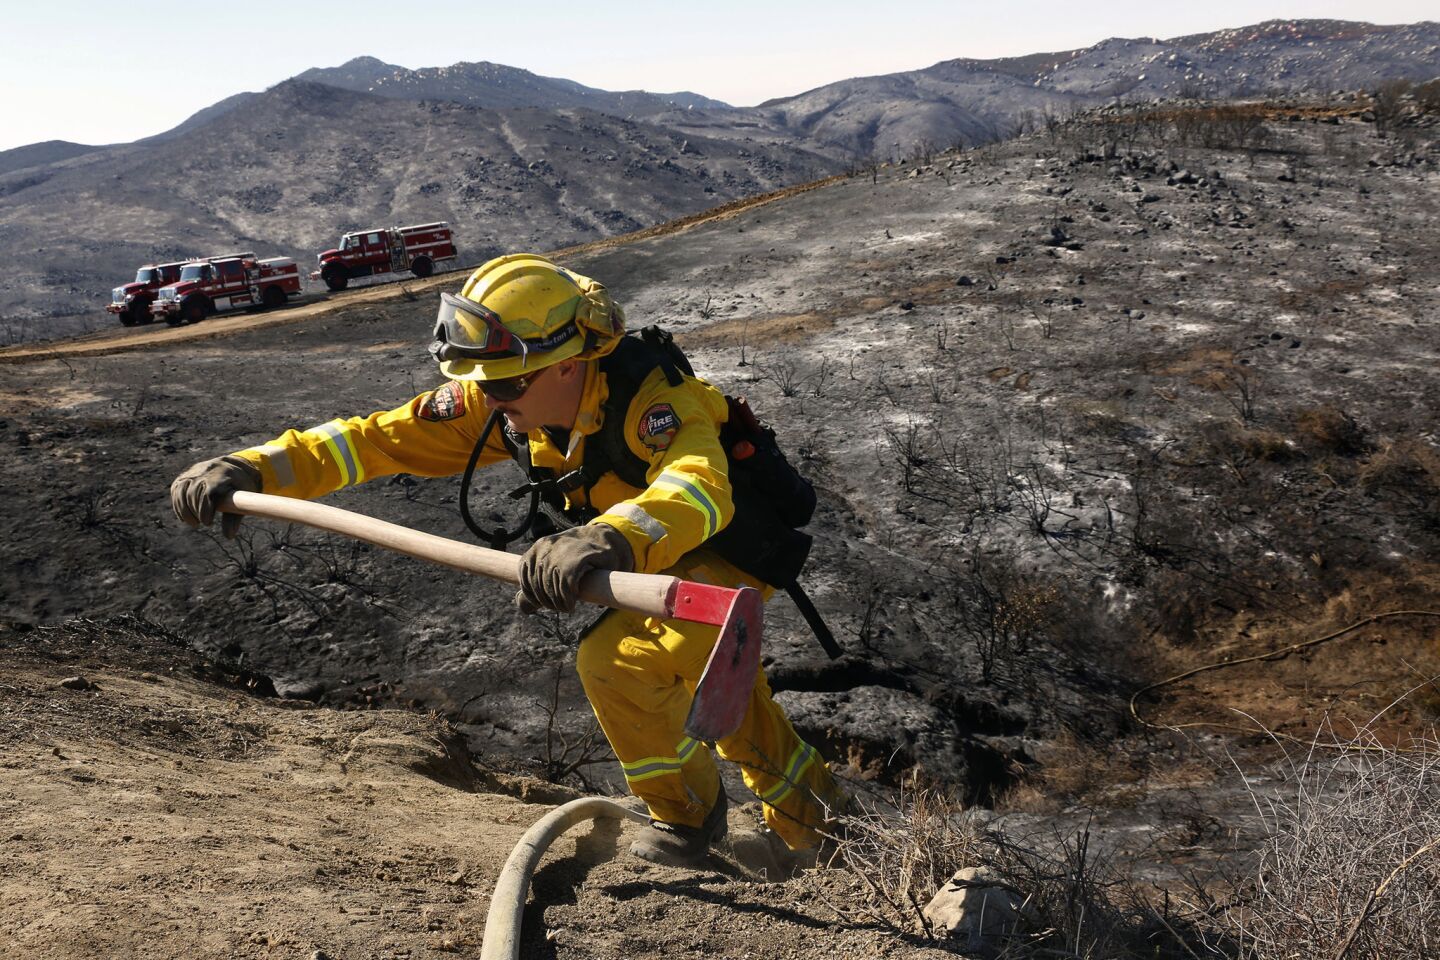 Lance Thibault climbs up a steep ridge to reach South Main Divide in Cleveland National Forest as firefighters continue to battle the 1,500-acre Falls fire near Lake Elsinore.